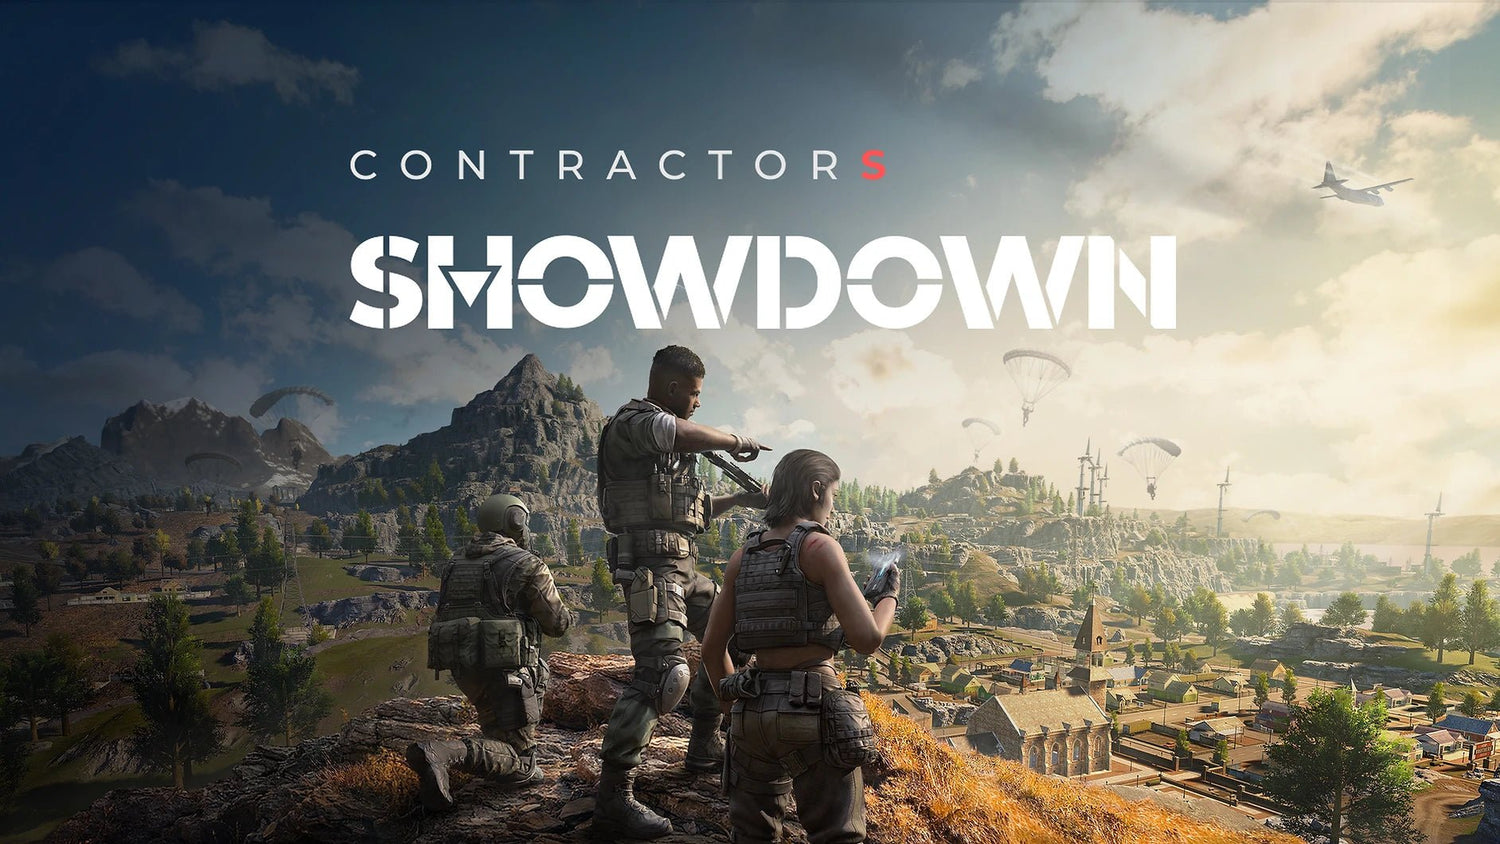 Contractors Showdown VR: The Next Big Thing in Battle Royale Gaming - iSTOCK VR